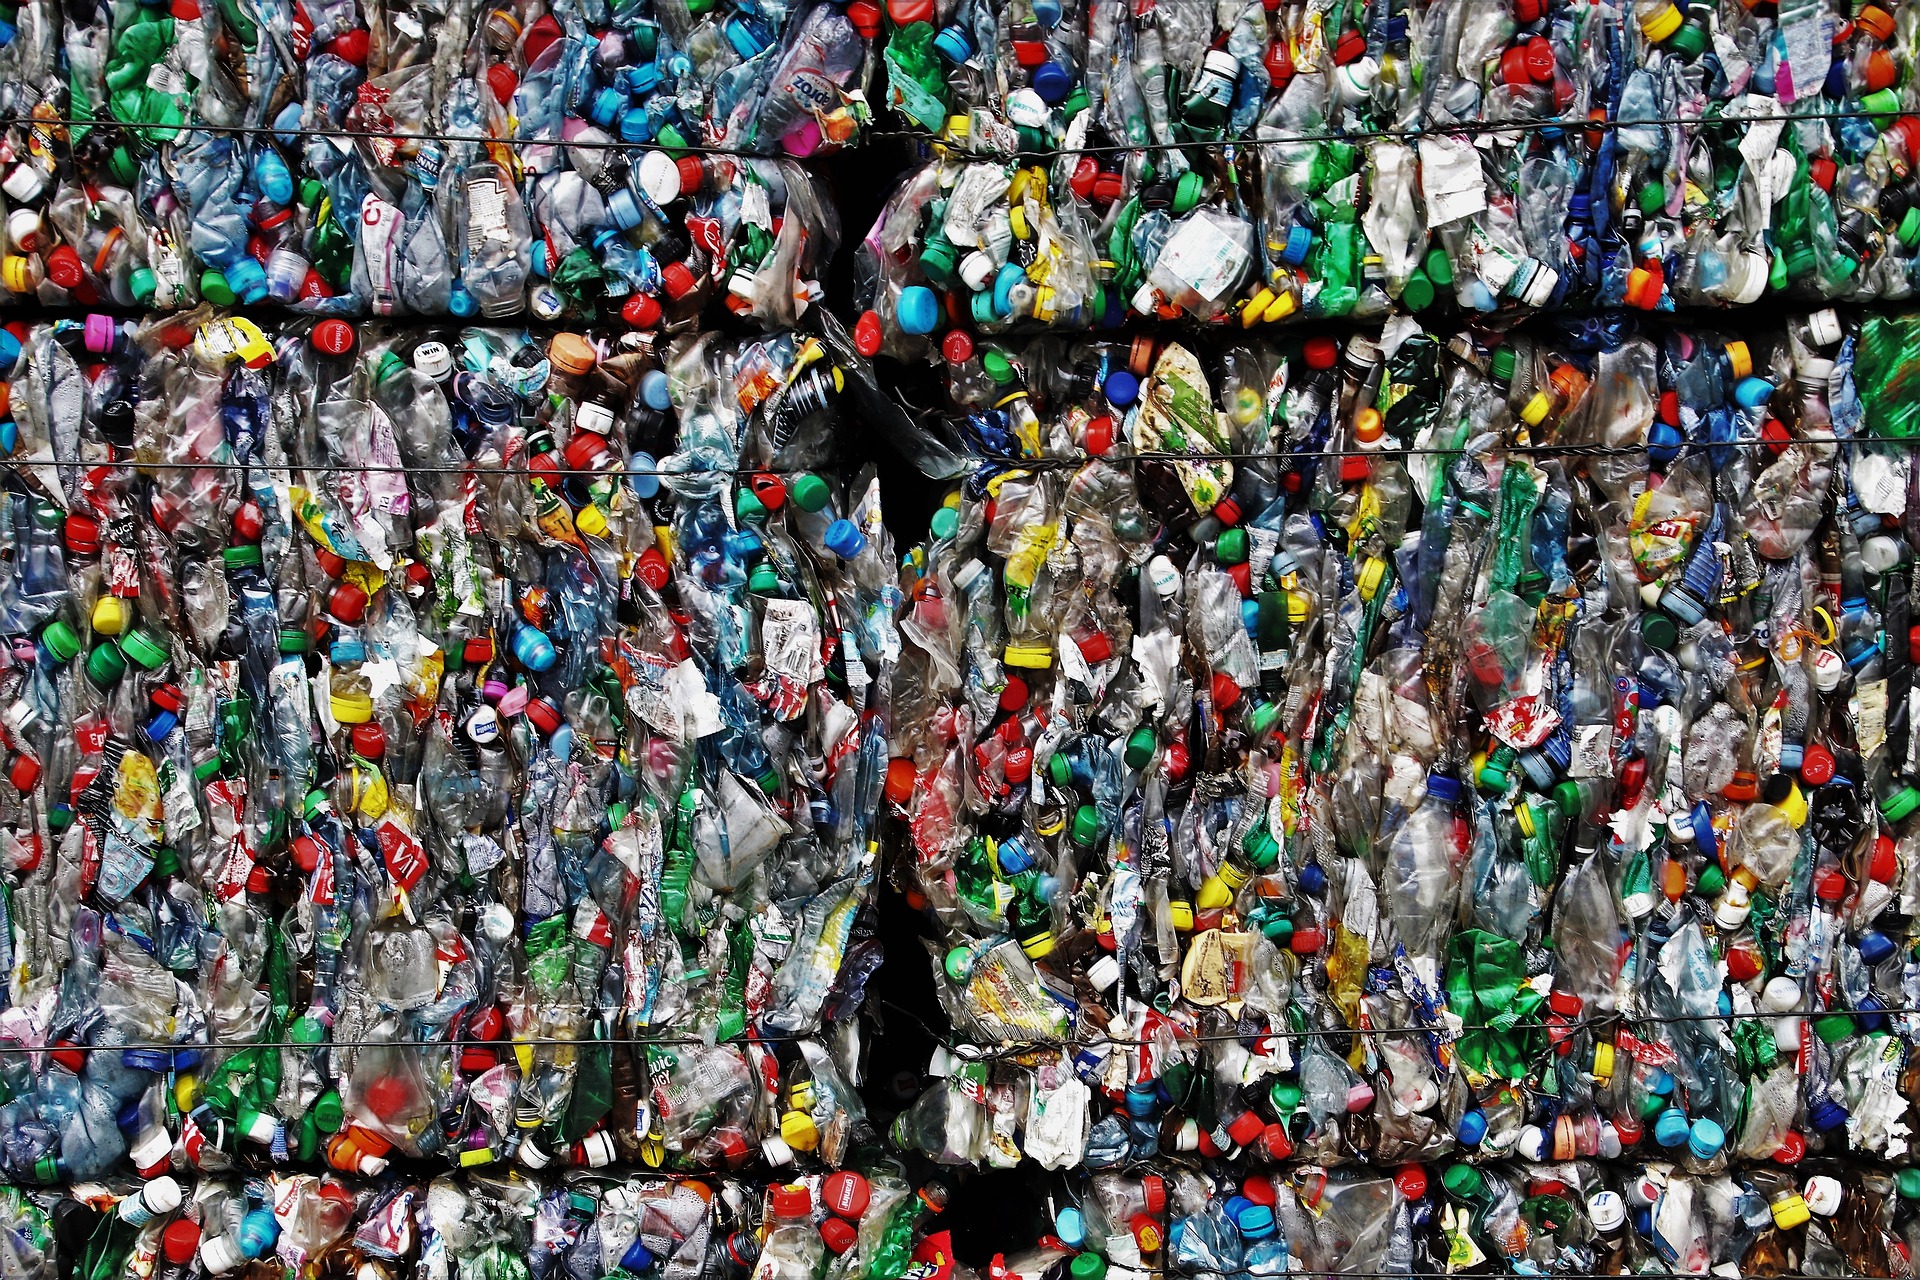 An image of of bundles of plastic bottles as an illustration to support with the PPT blog post